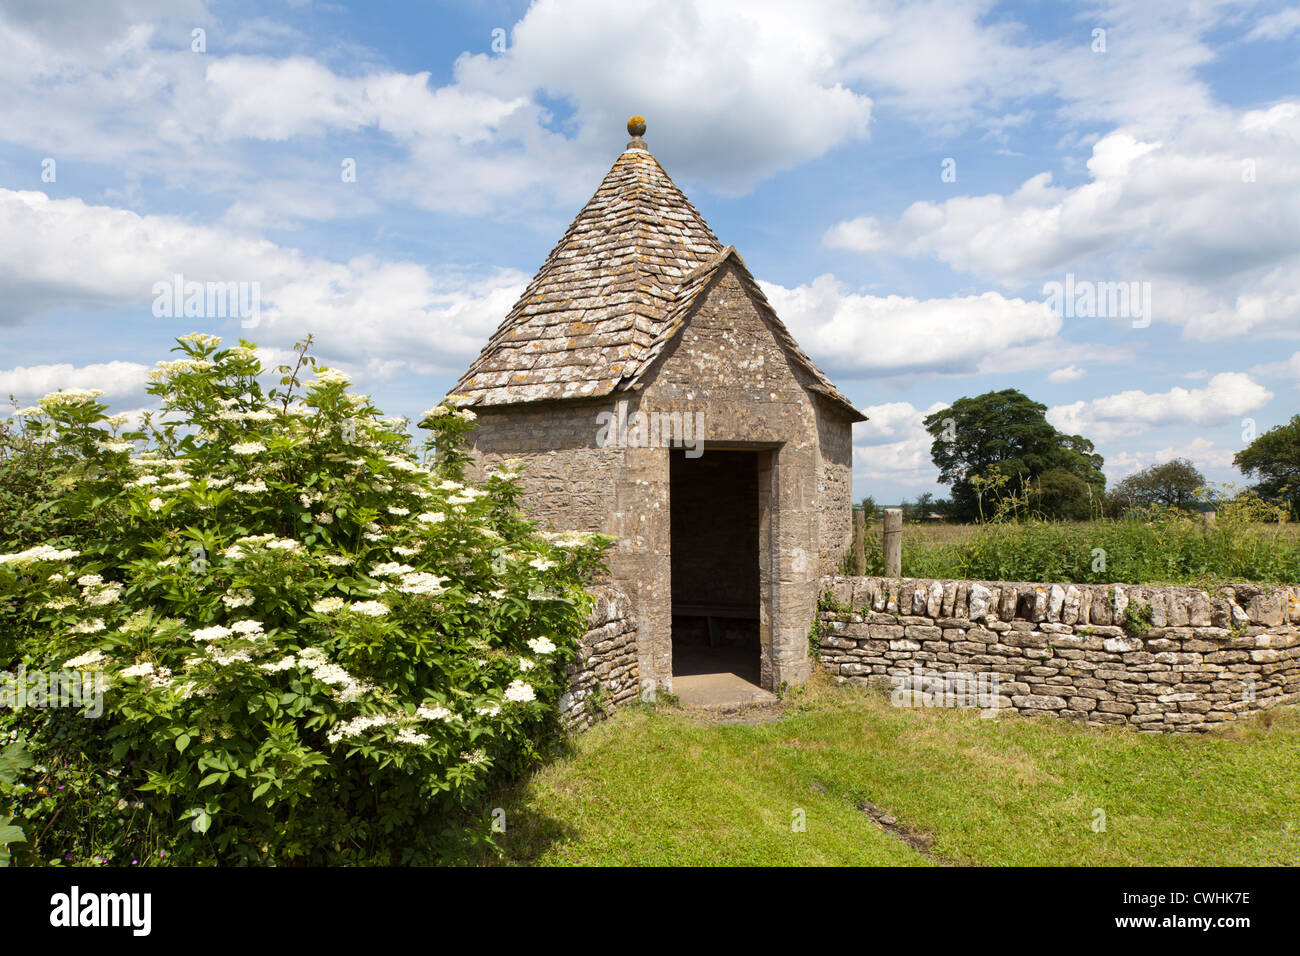 A delightfully quirky octagonal bus shelter built of Cotswold stone in the Cotswold village of Farmington, Gloucestershire, UK Stock Photo